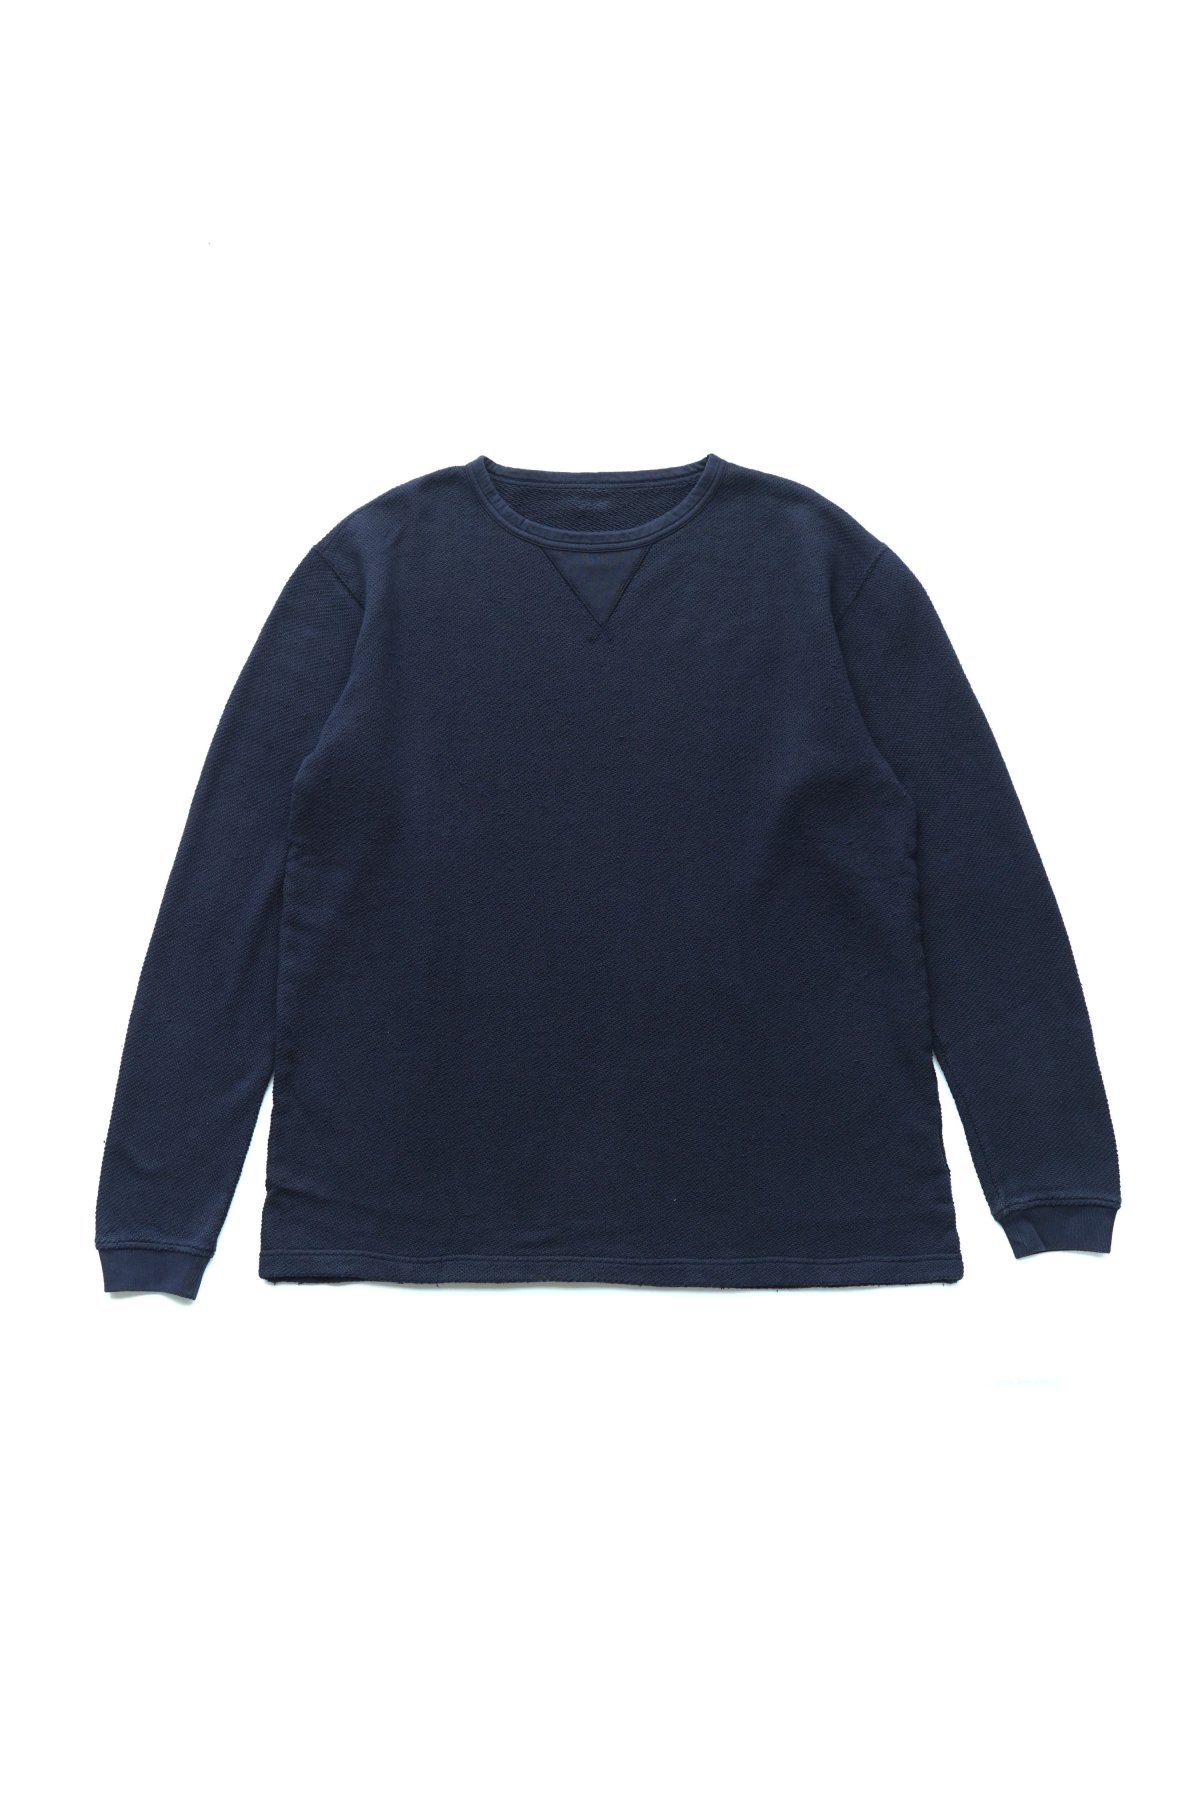 Porter Classic - FRENCH THERMAL CREWNECK - BLUE ポータークラシック 